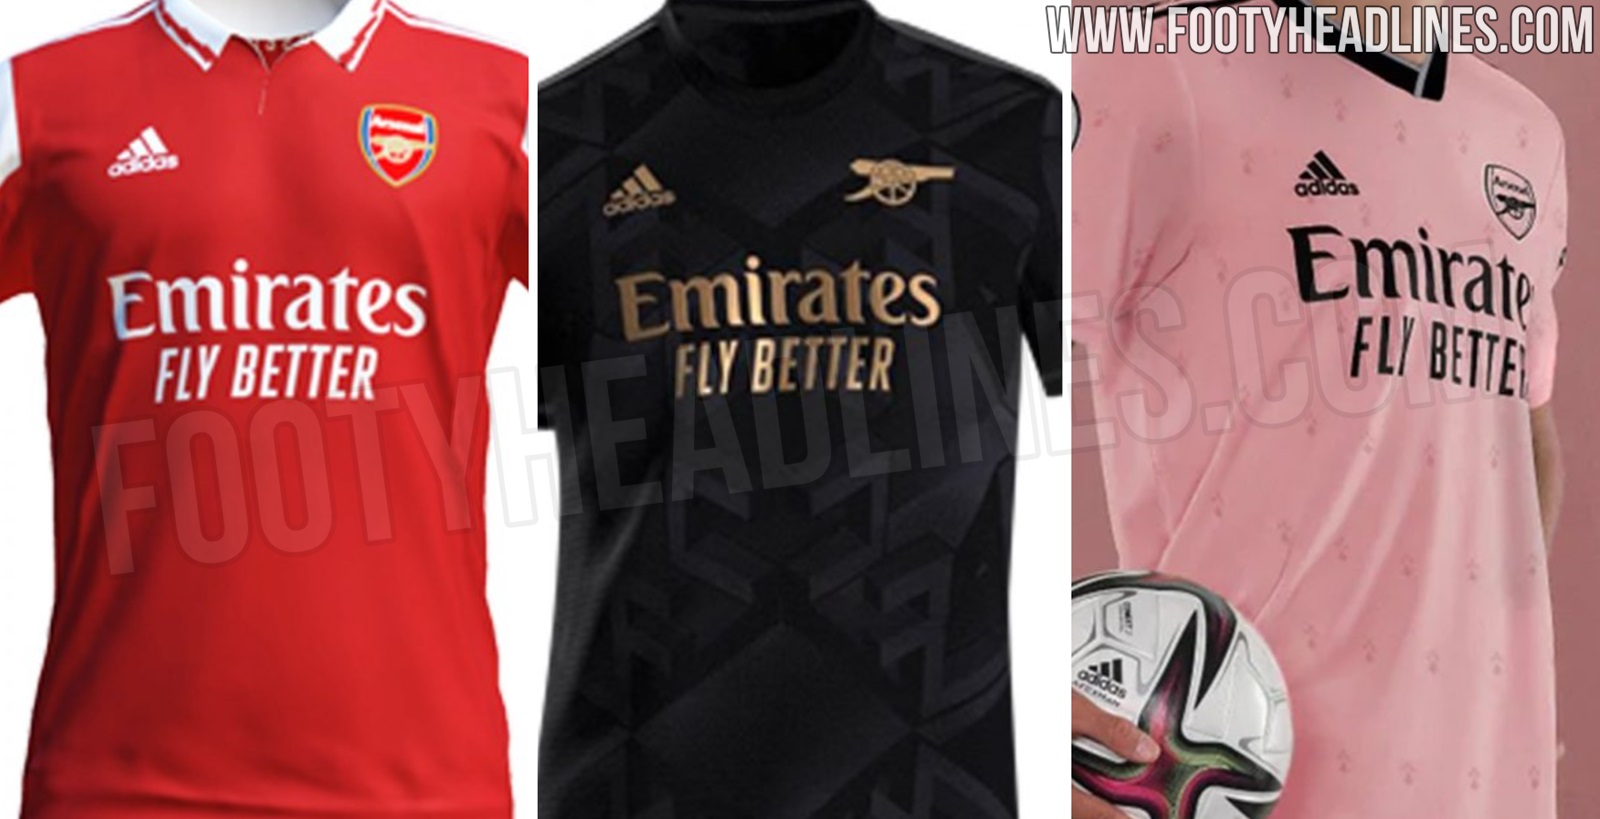 Cater Oeps militie Arsenal 22-23 Home, Away & Third Kits Leaked - Footy Headlines